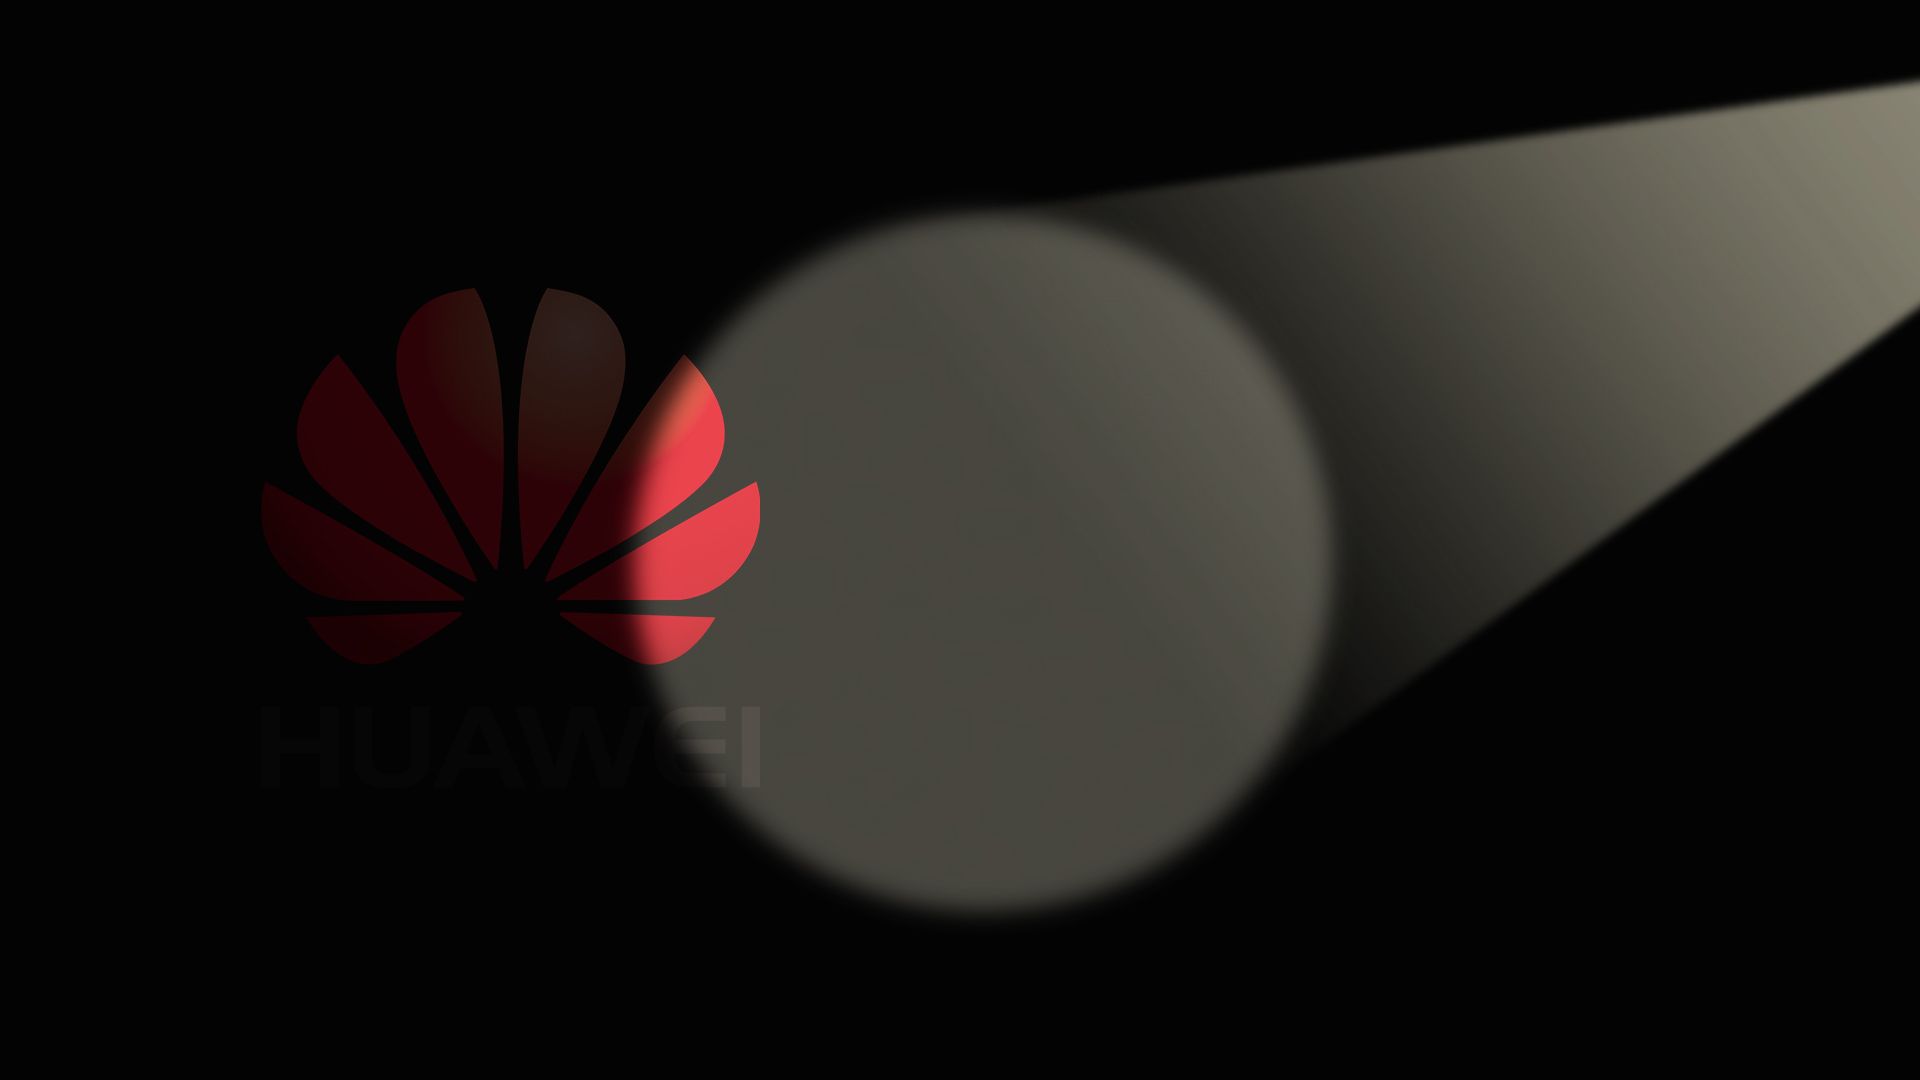  Illustration of a spotlight searching out the Huawei logo.  